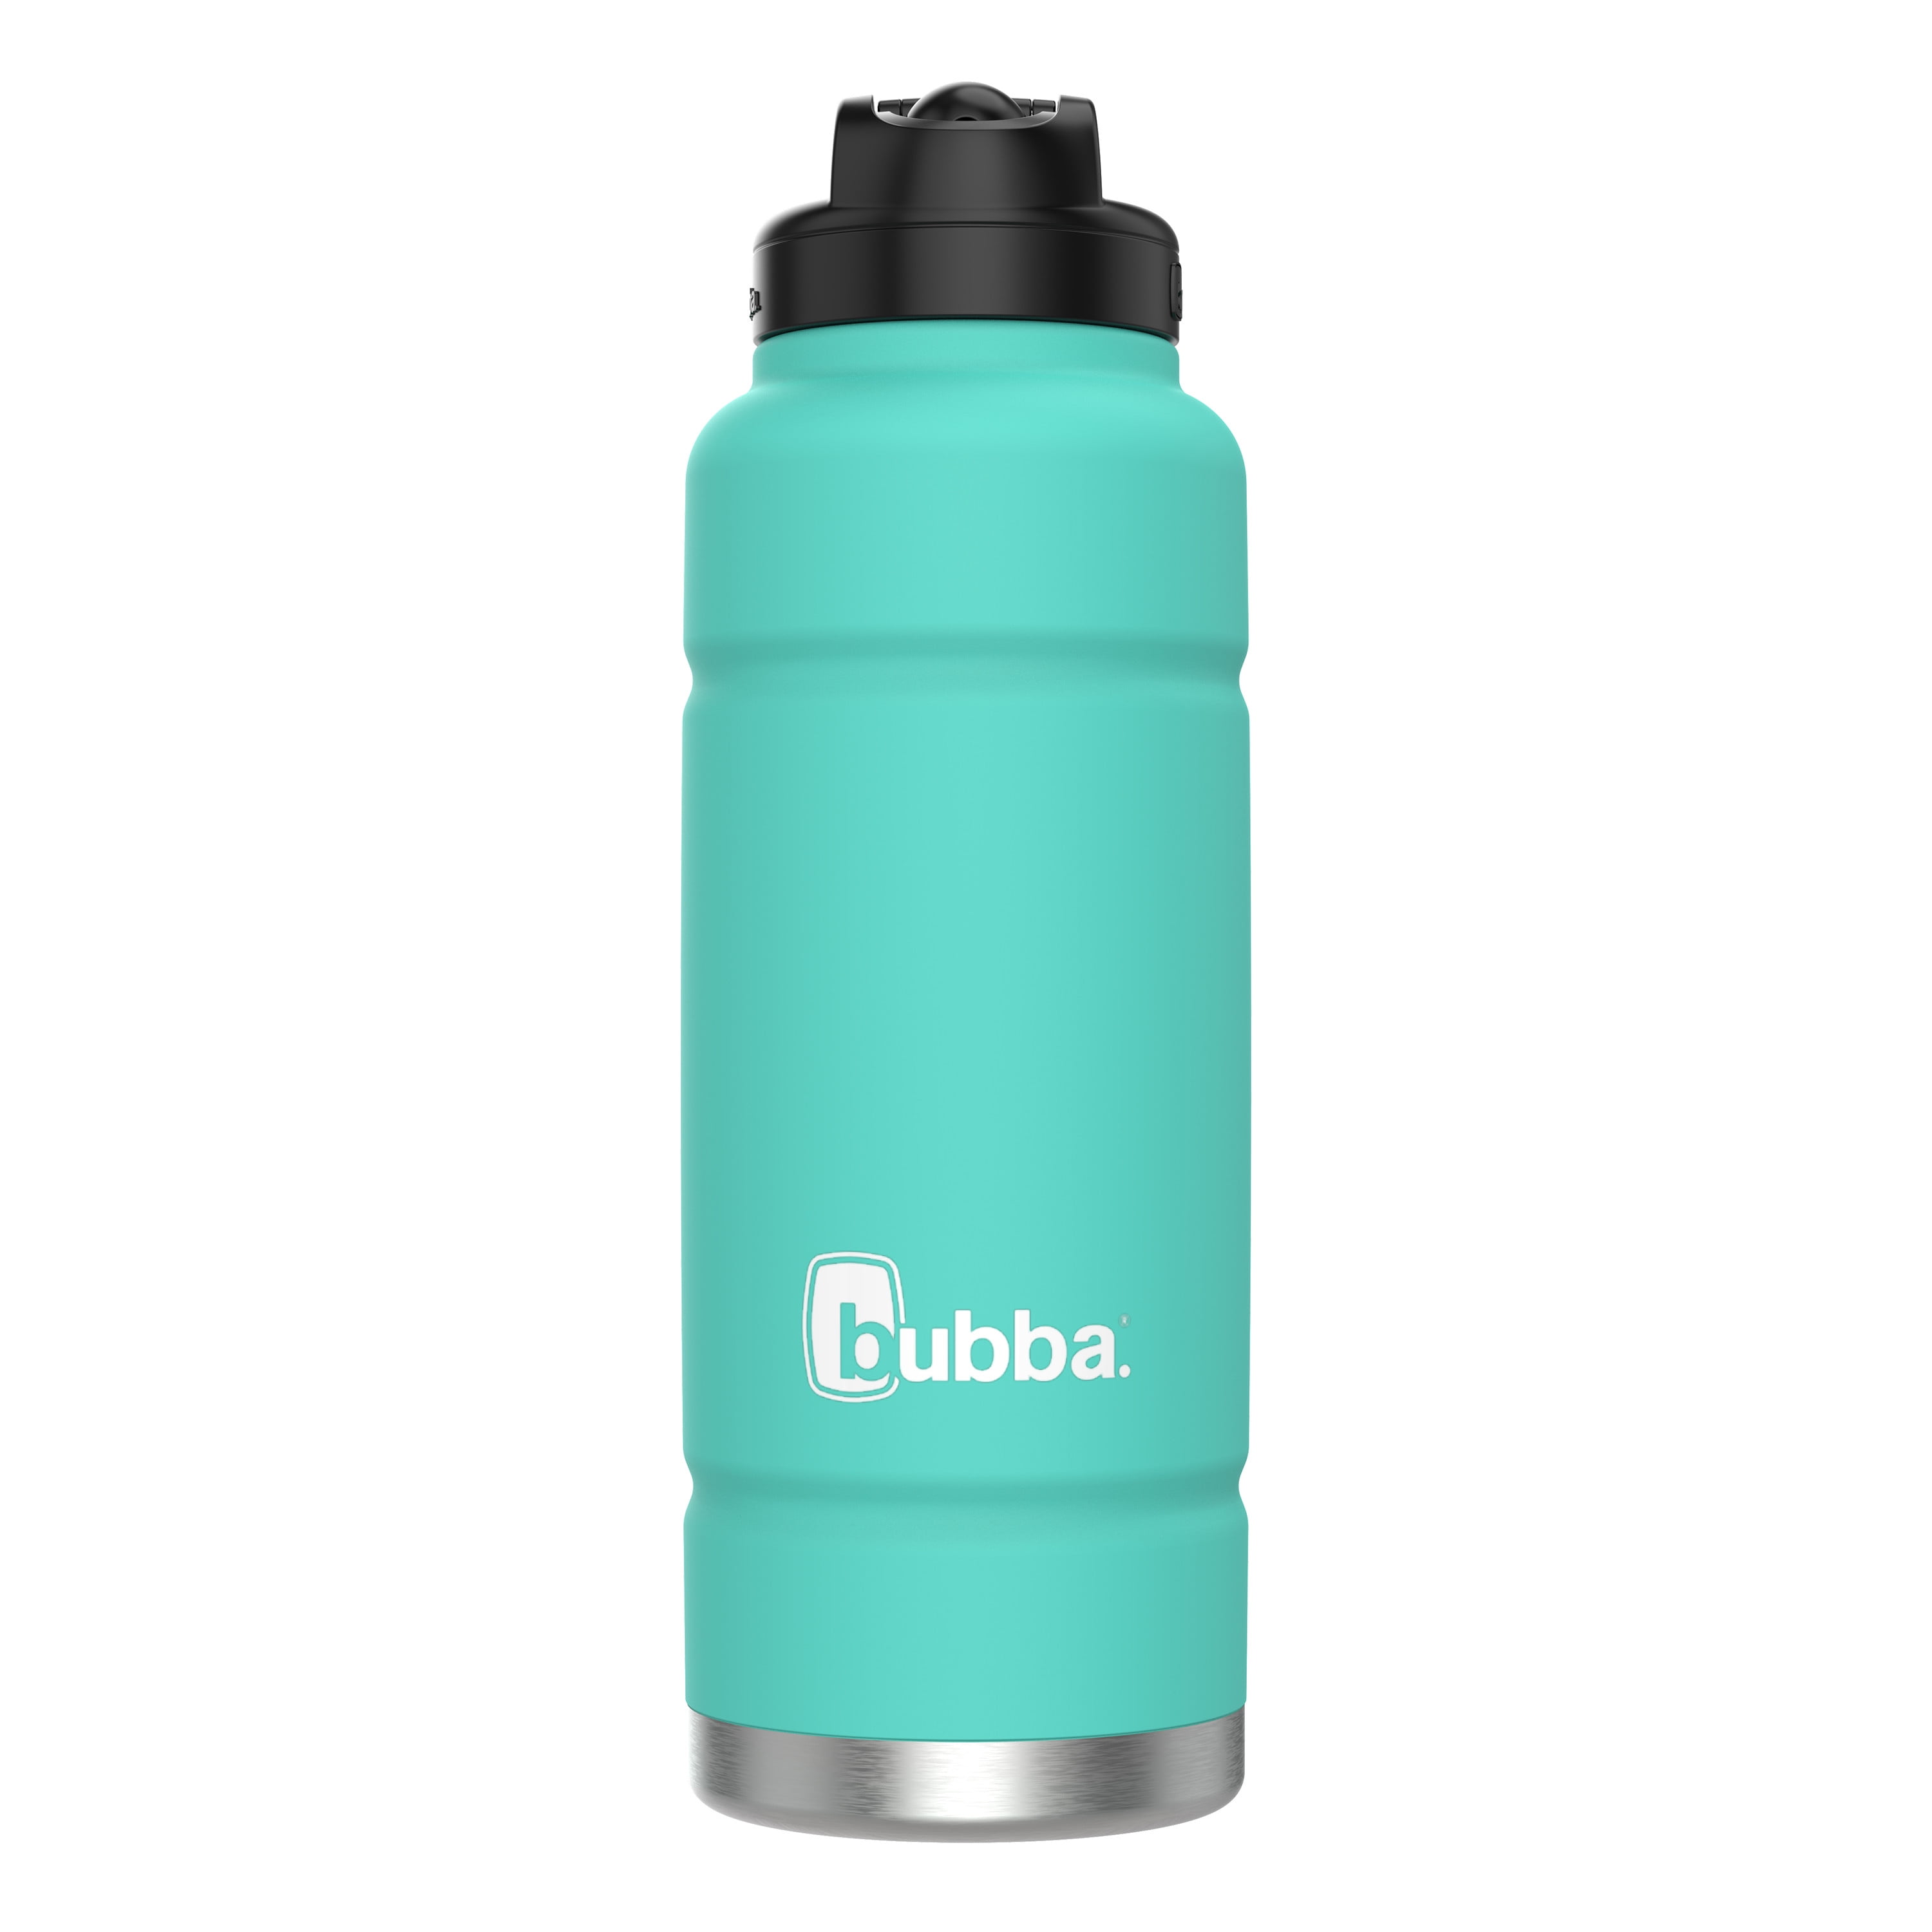 bubba Trailblazer Insulated Stainless Steel Water Bottle with Straw Lidin Teal, 40 oz., Rubberized